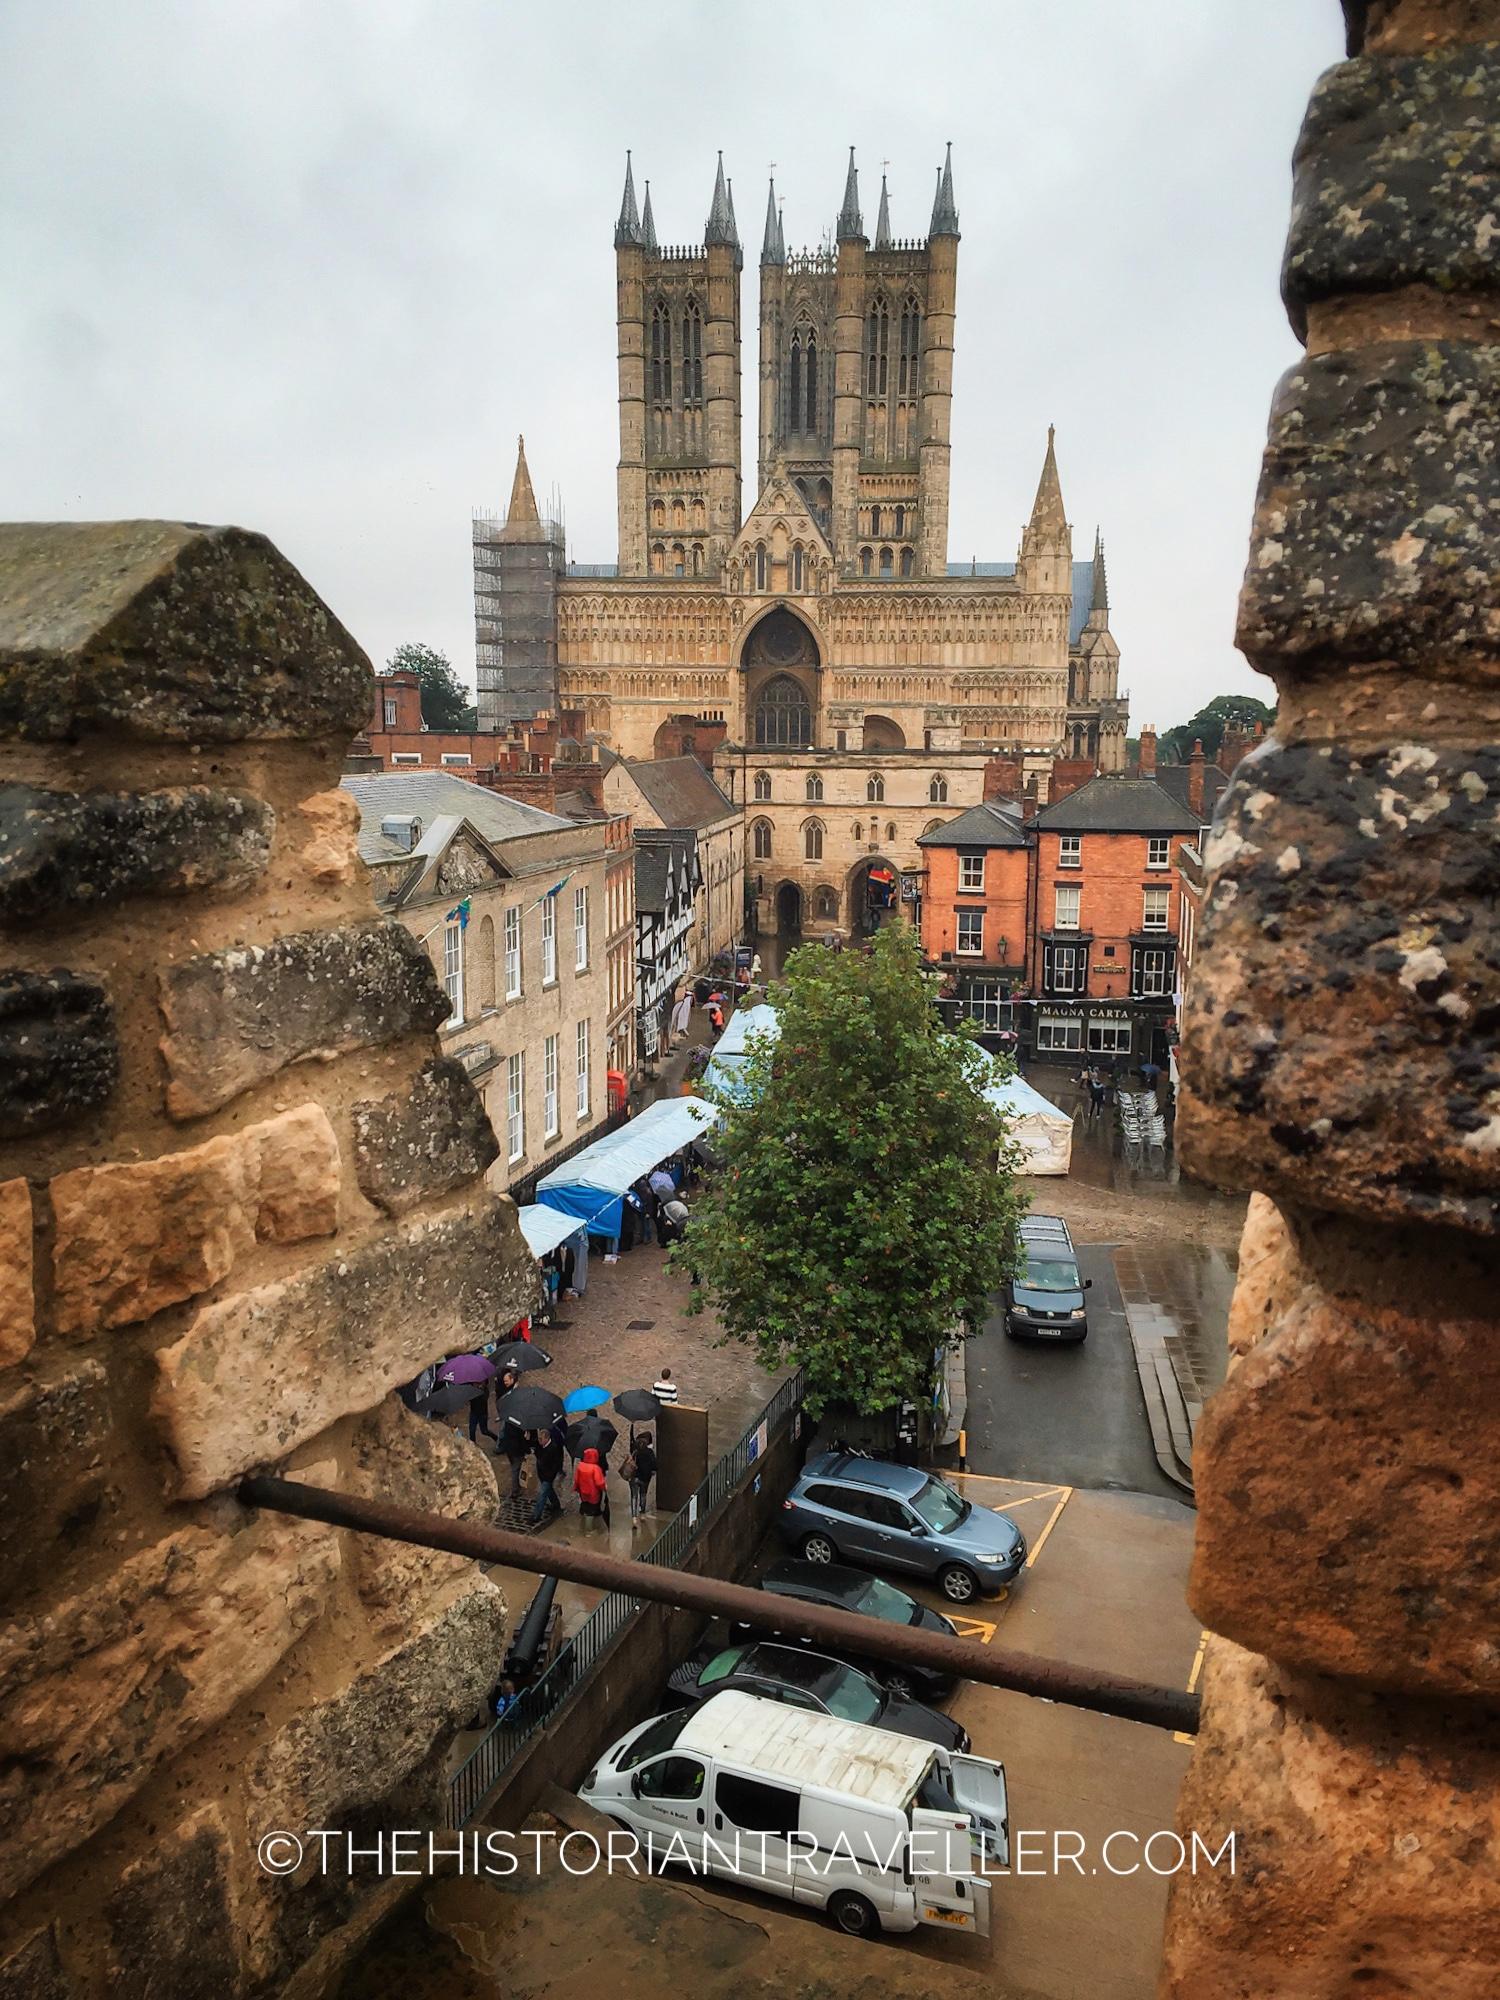 View of the Lincoln Cathedral from the Castle walls